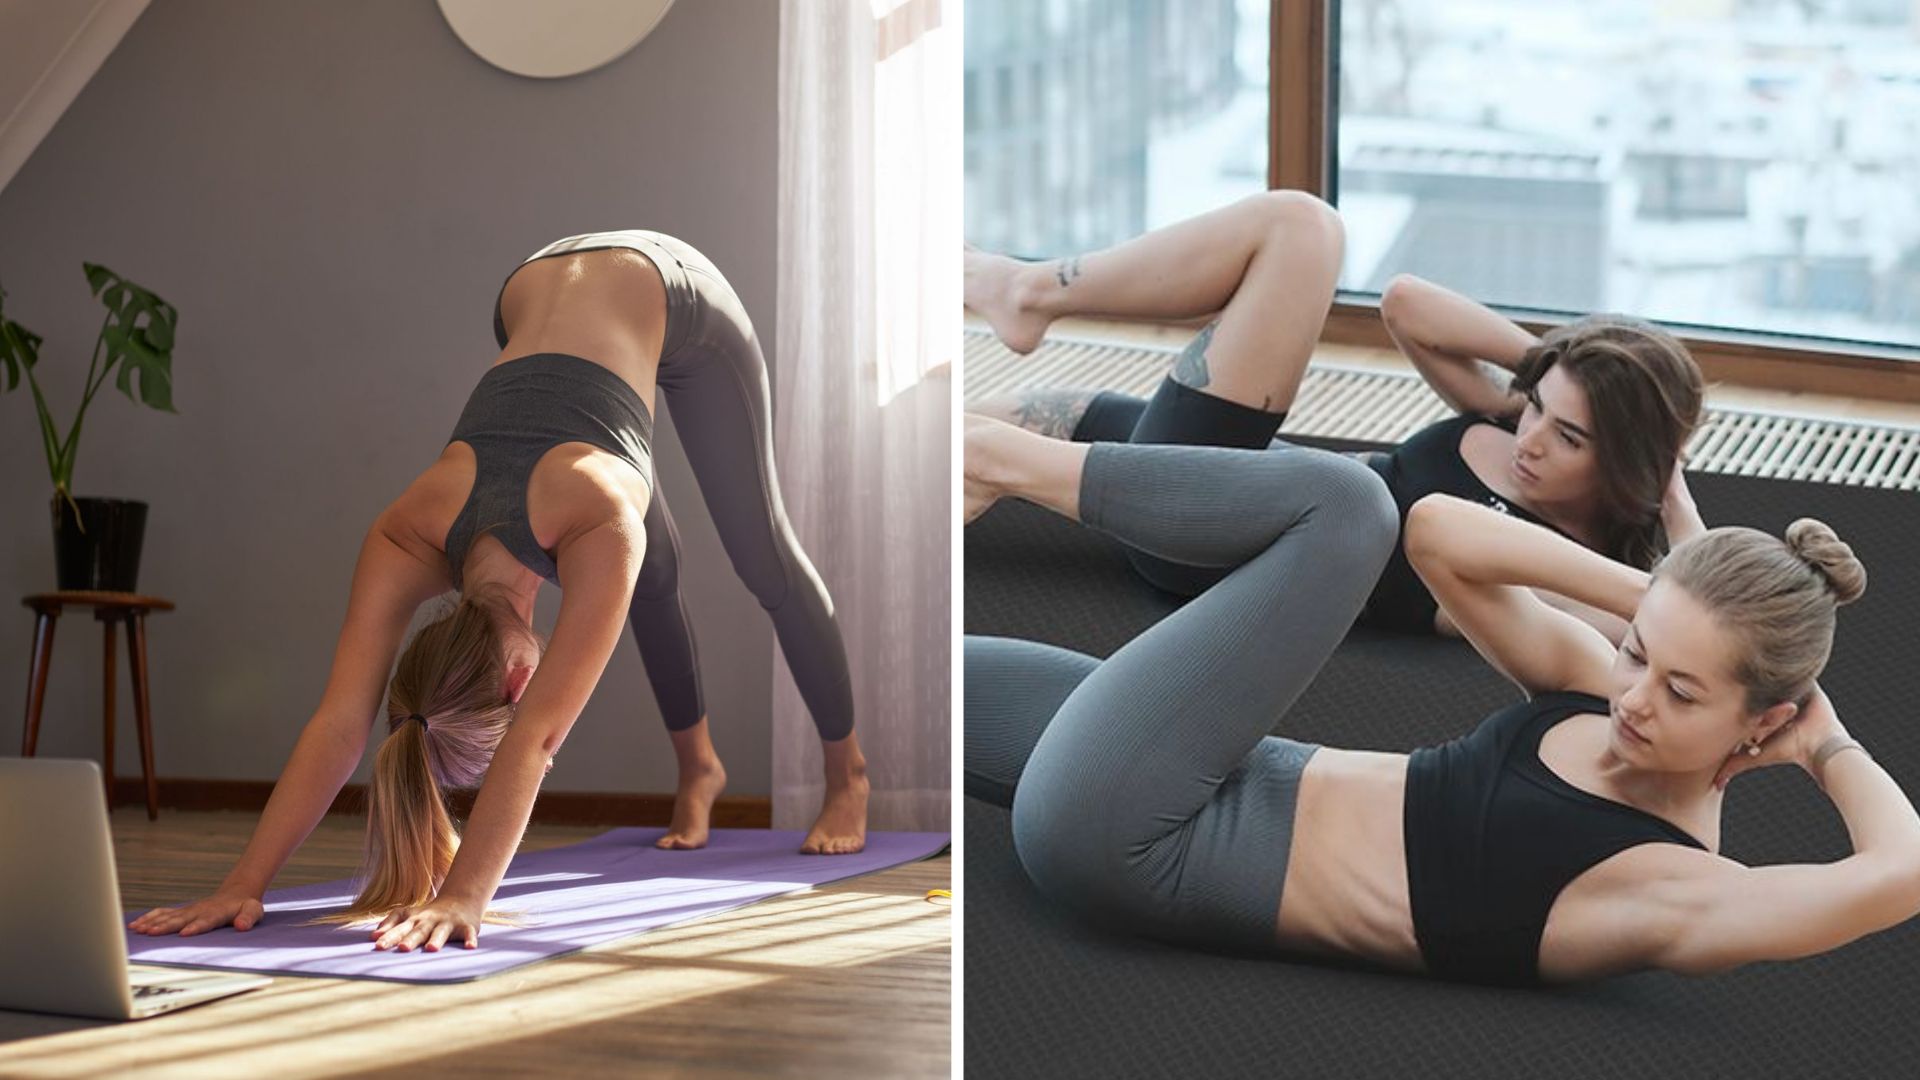 Value Yoga Kit by Yoga Direct